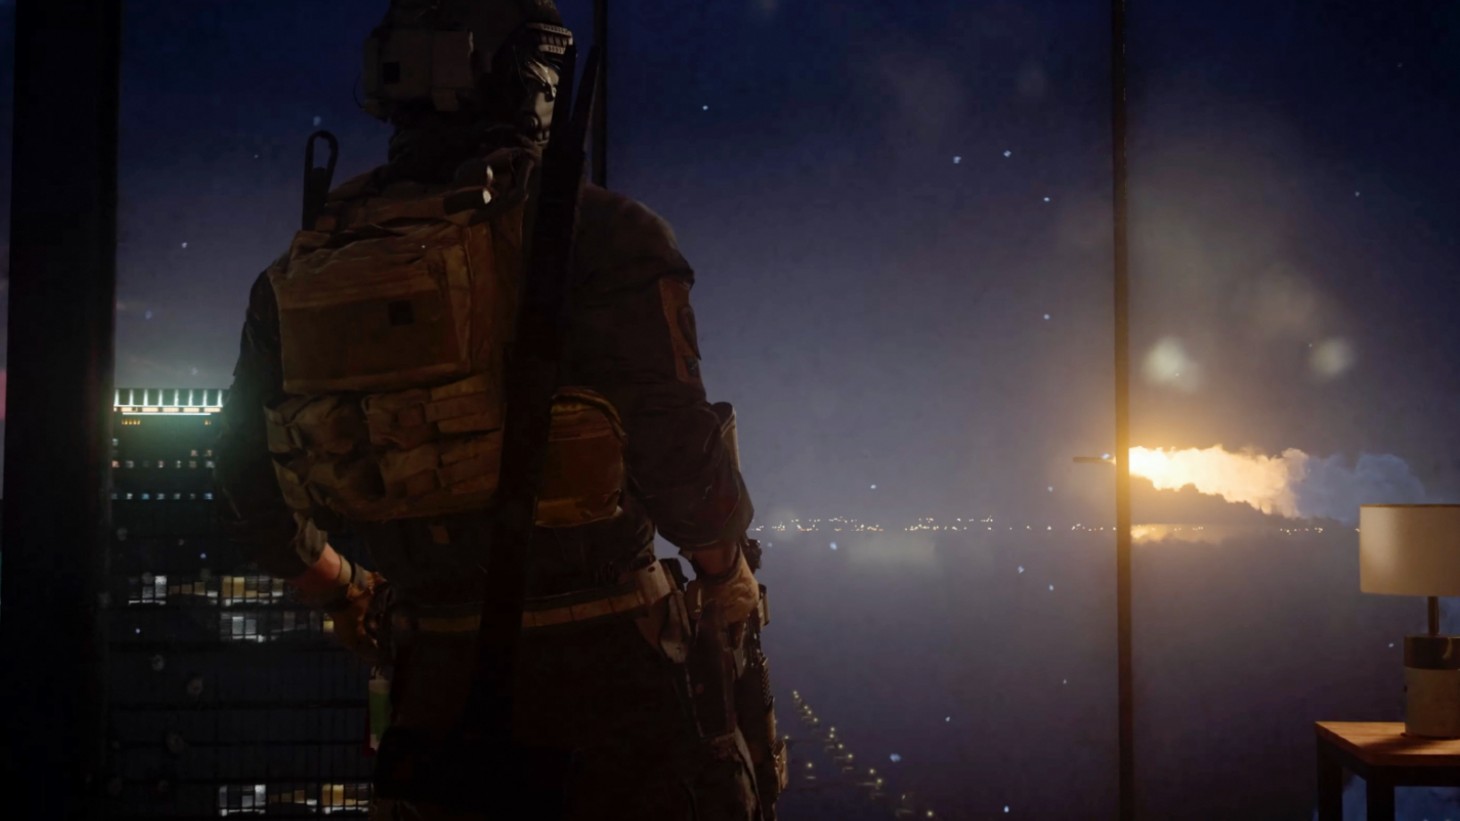 Call of Duty Advanced Warfare launches new multiplayer mode